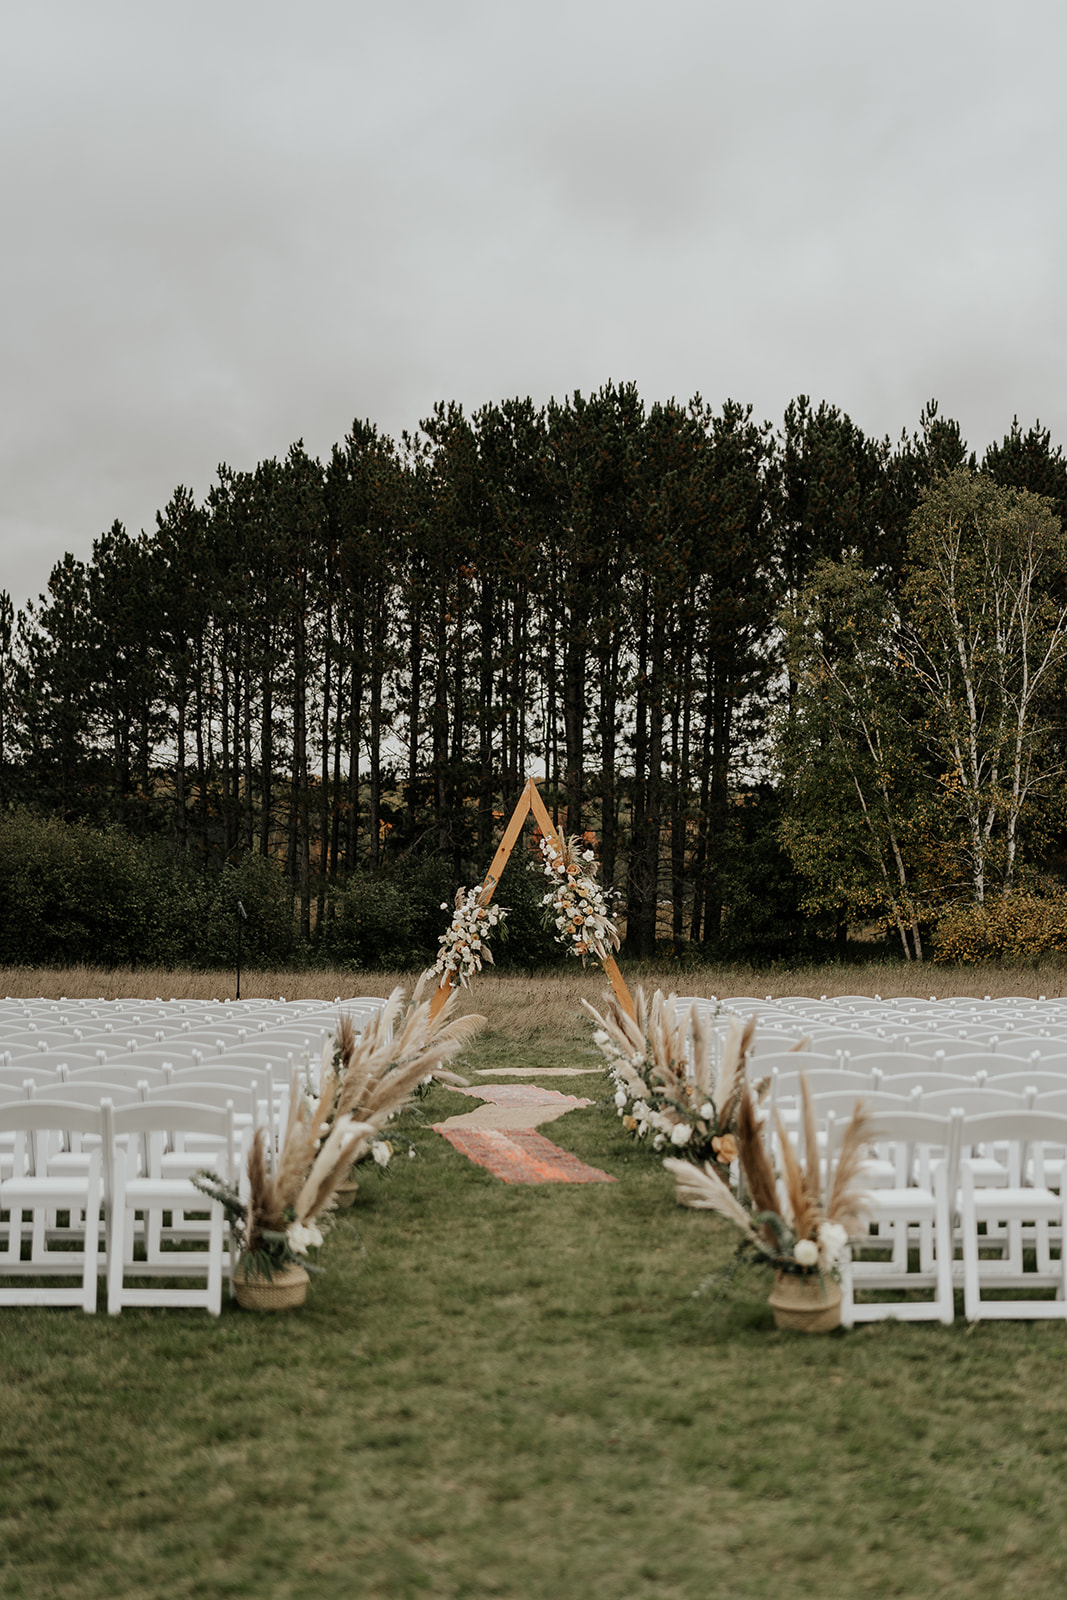 Outdoor wedding setup with white chairs and a triangular wooden arch, surrounded by lush trees. decorative grasses flank a central aisle.